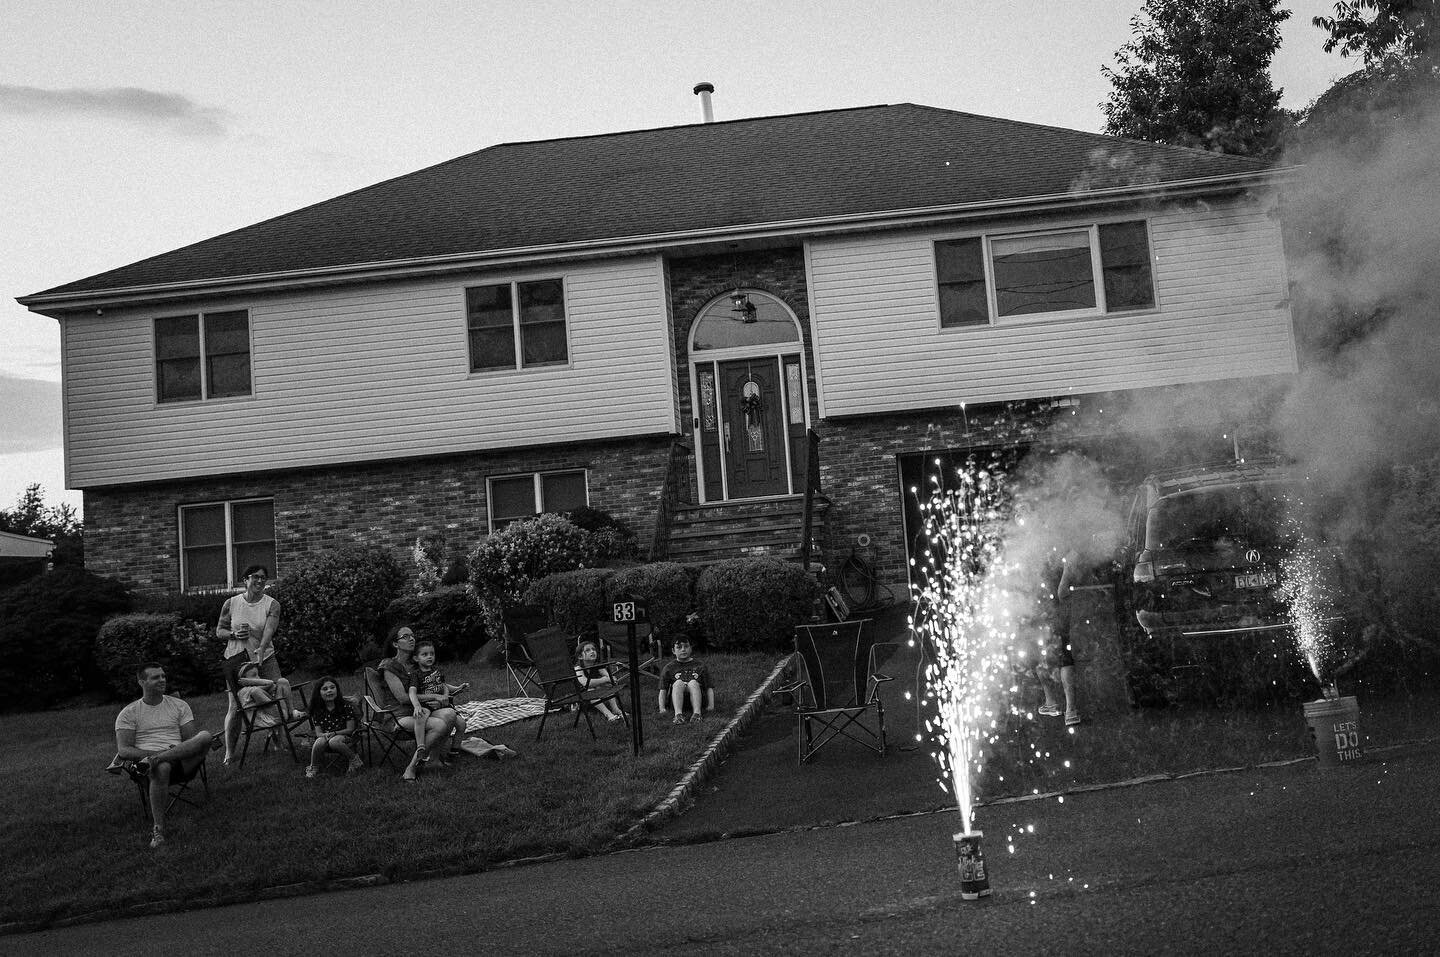 Street fireworks in our new neighborhood. The new neighbors are the best